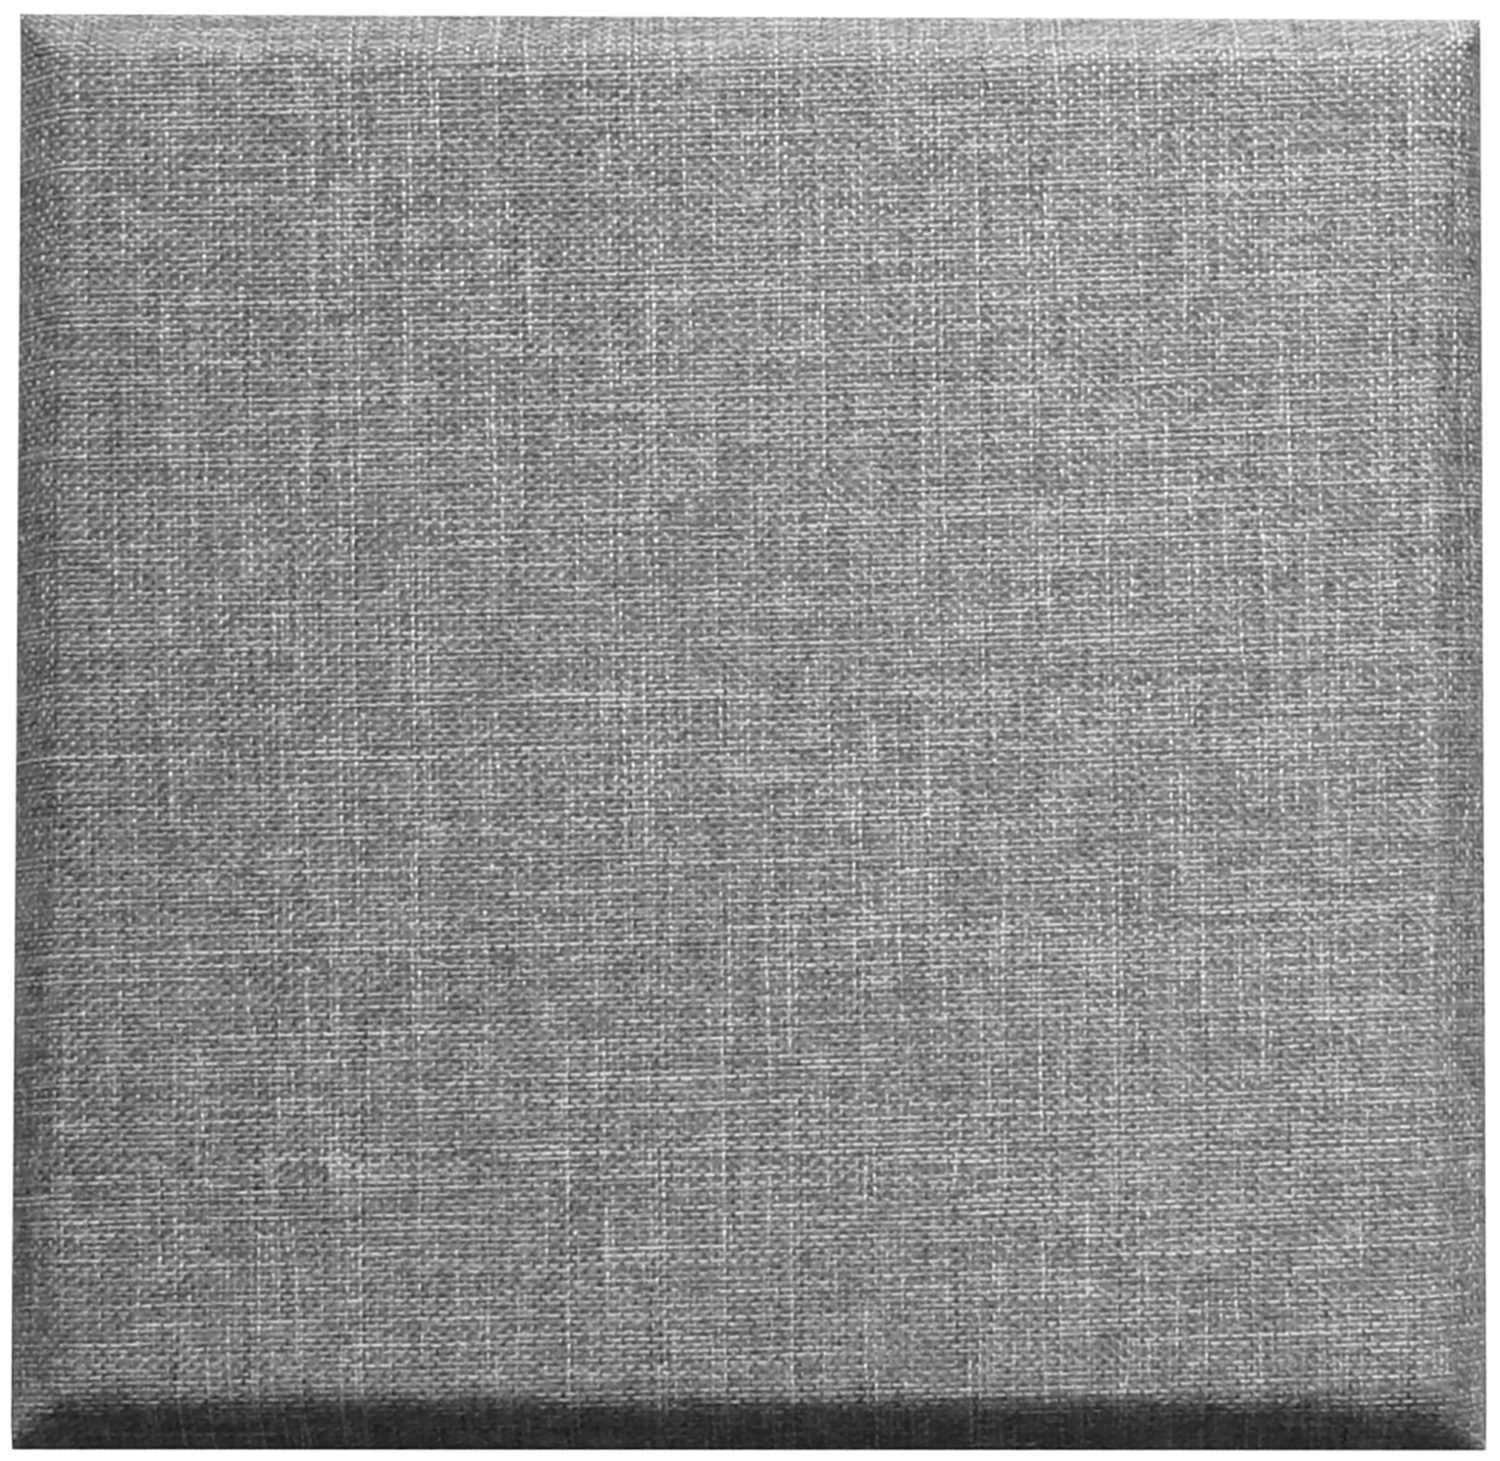 Primacoustic BRF-BK Grey Broadway Fabric Per Ft - ProSound and Stage Lighting